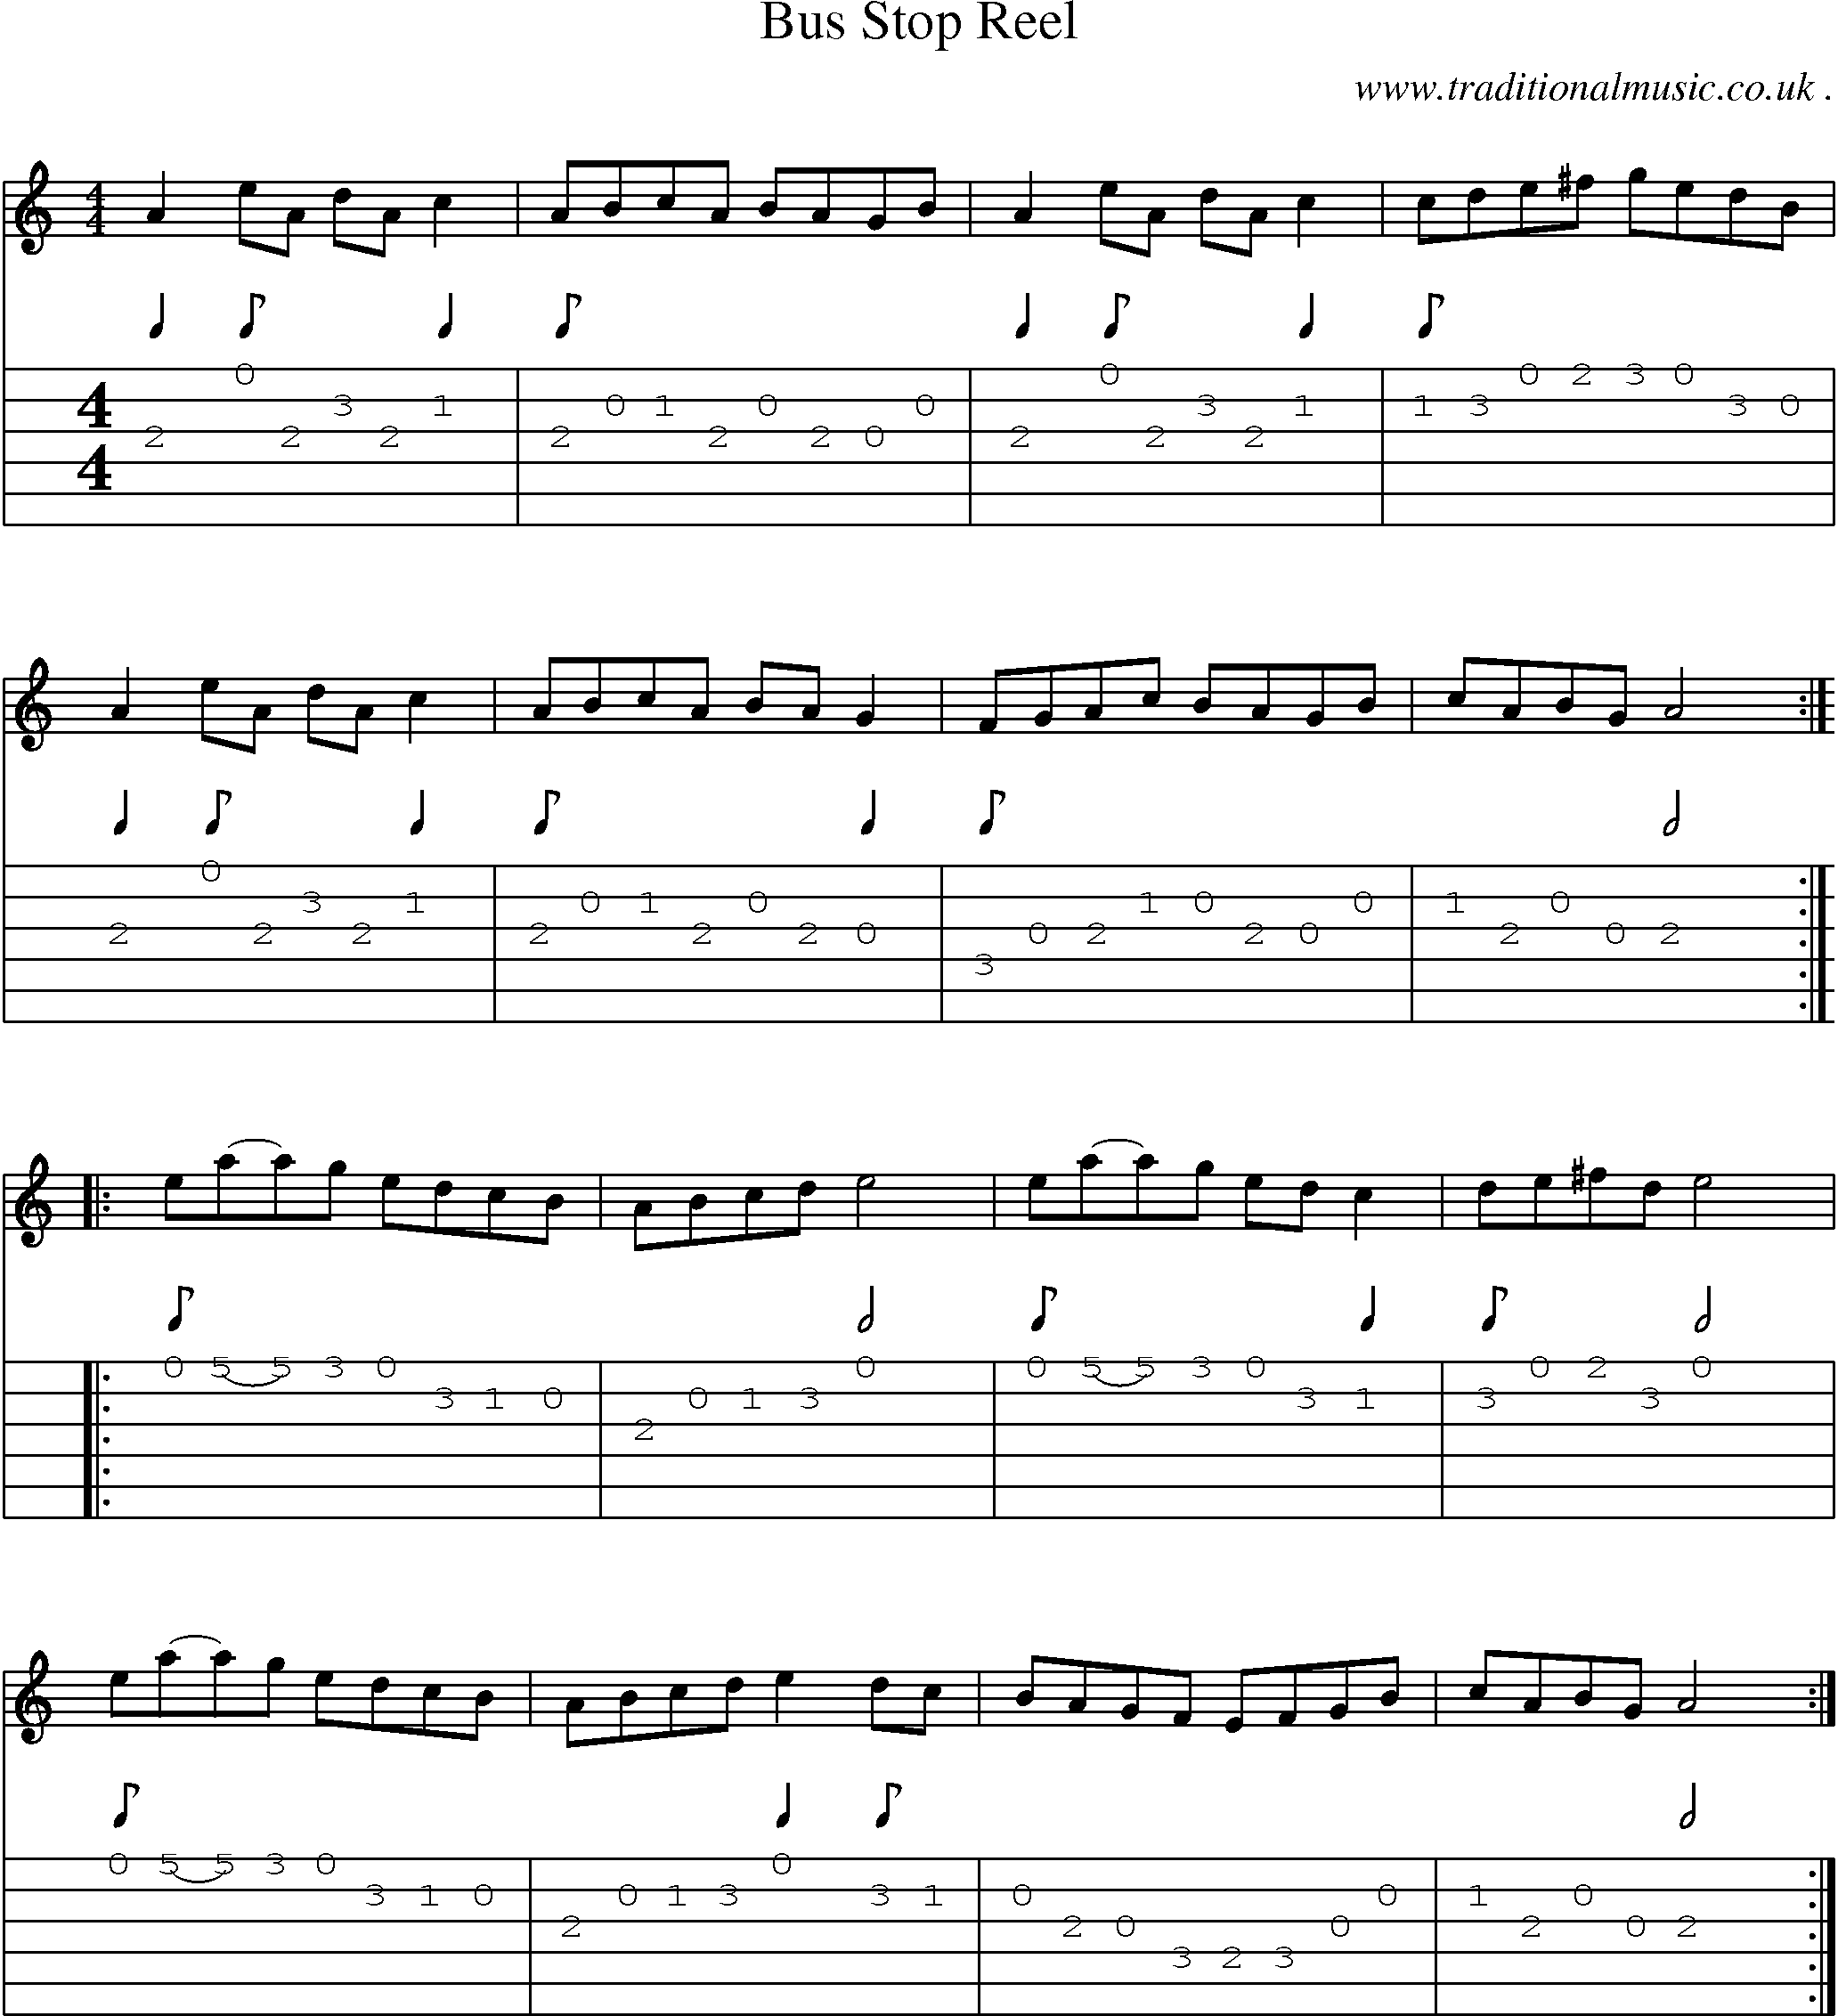 Sheet-Music and Guitar Tabs for Bus Stop Reel